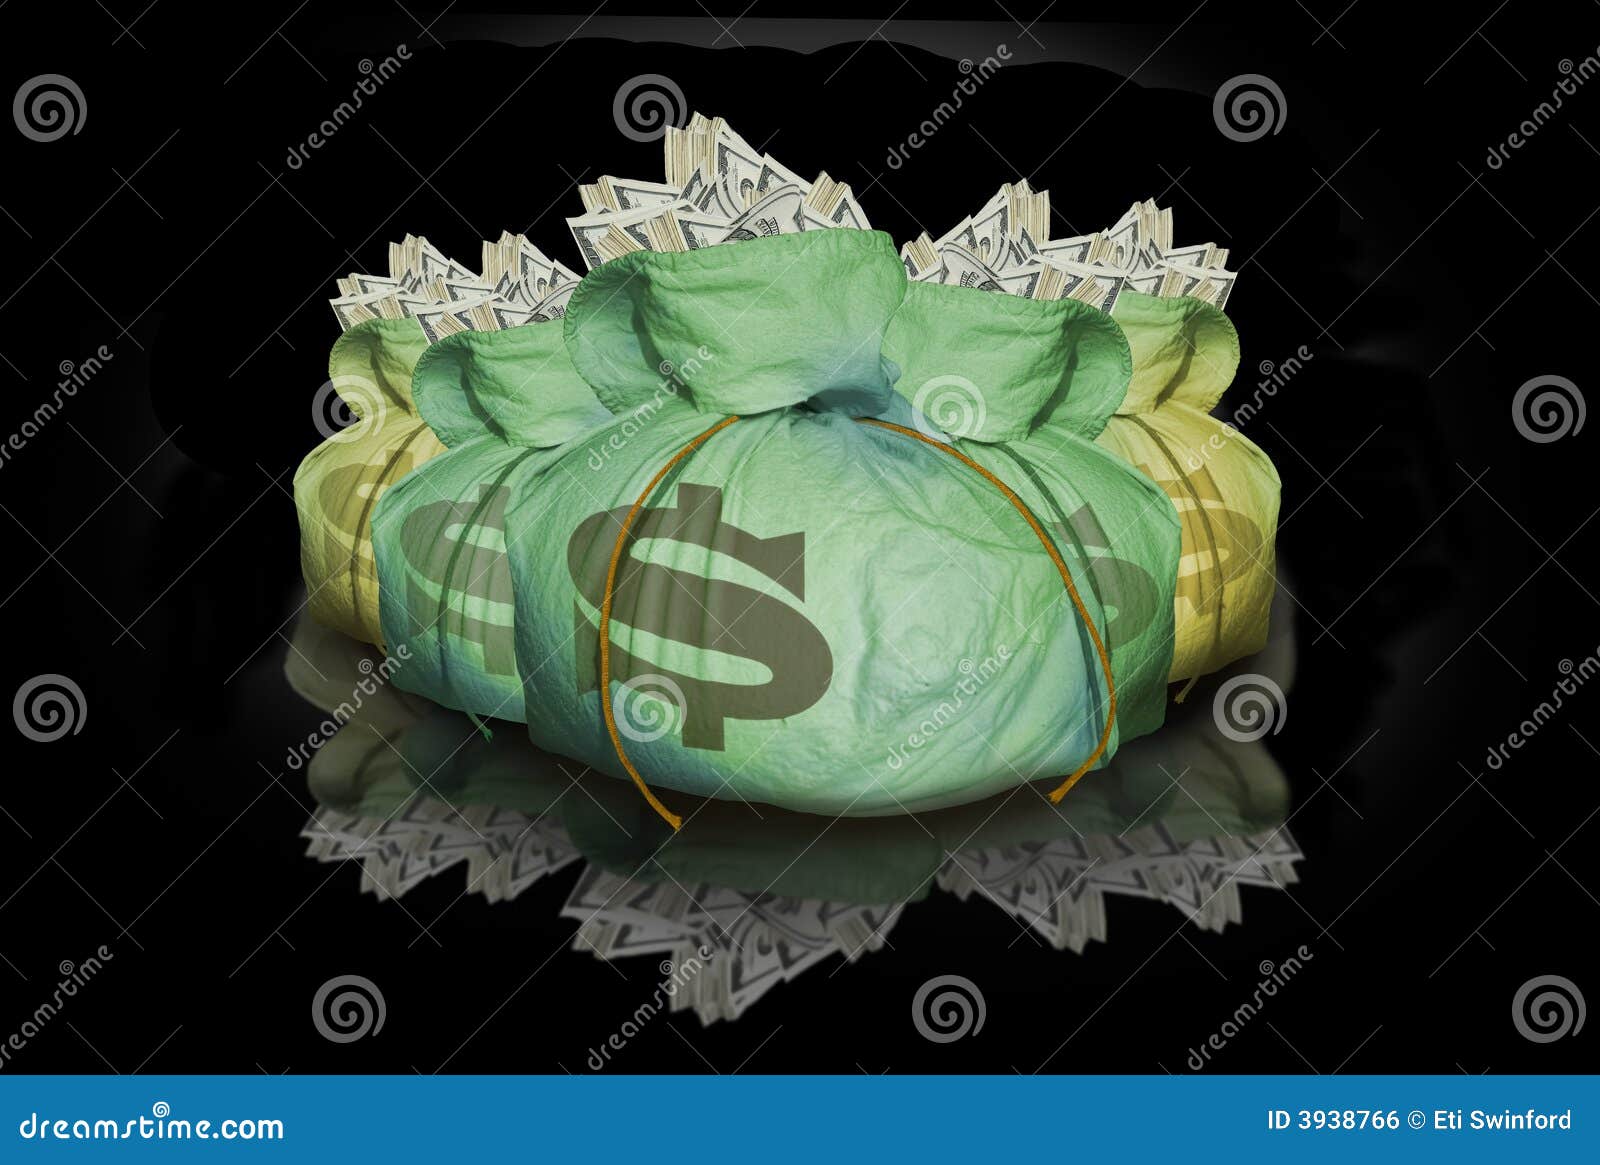 bags of money with reflection